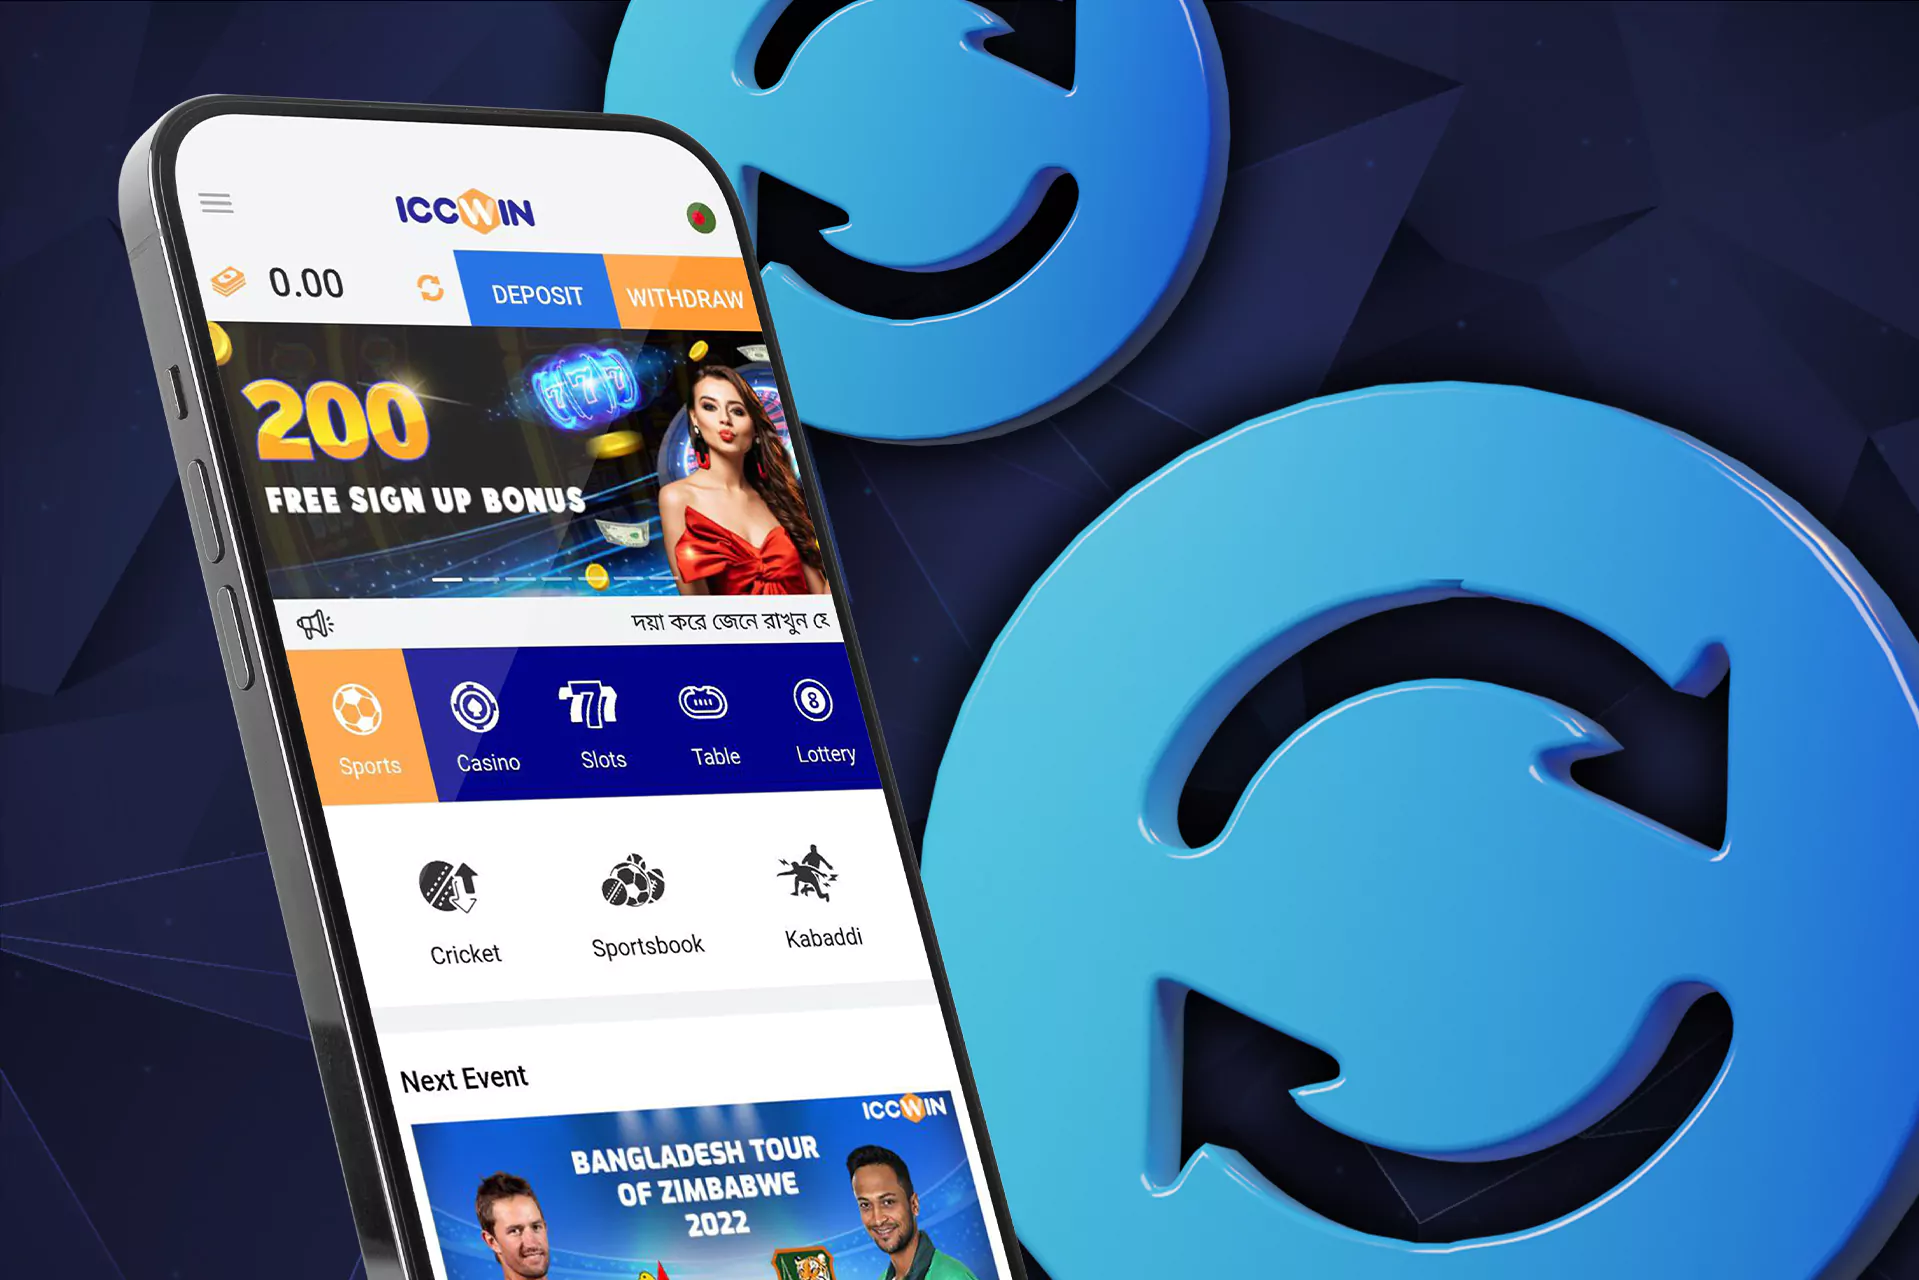 Keep your ICCWIN app updated for convenient betting.